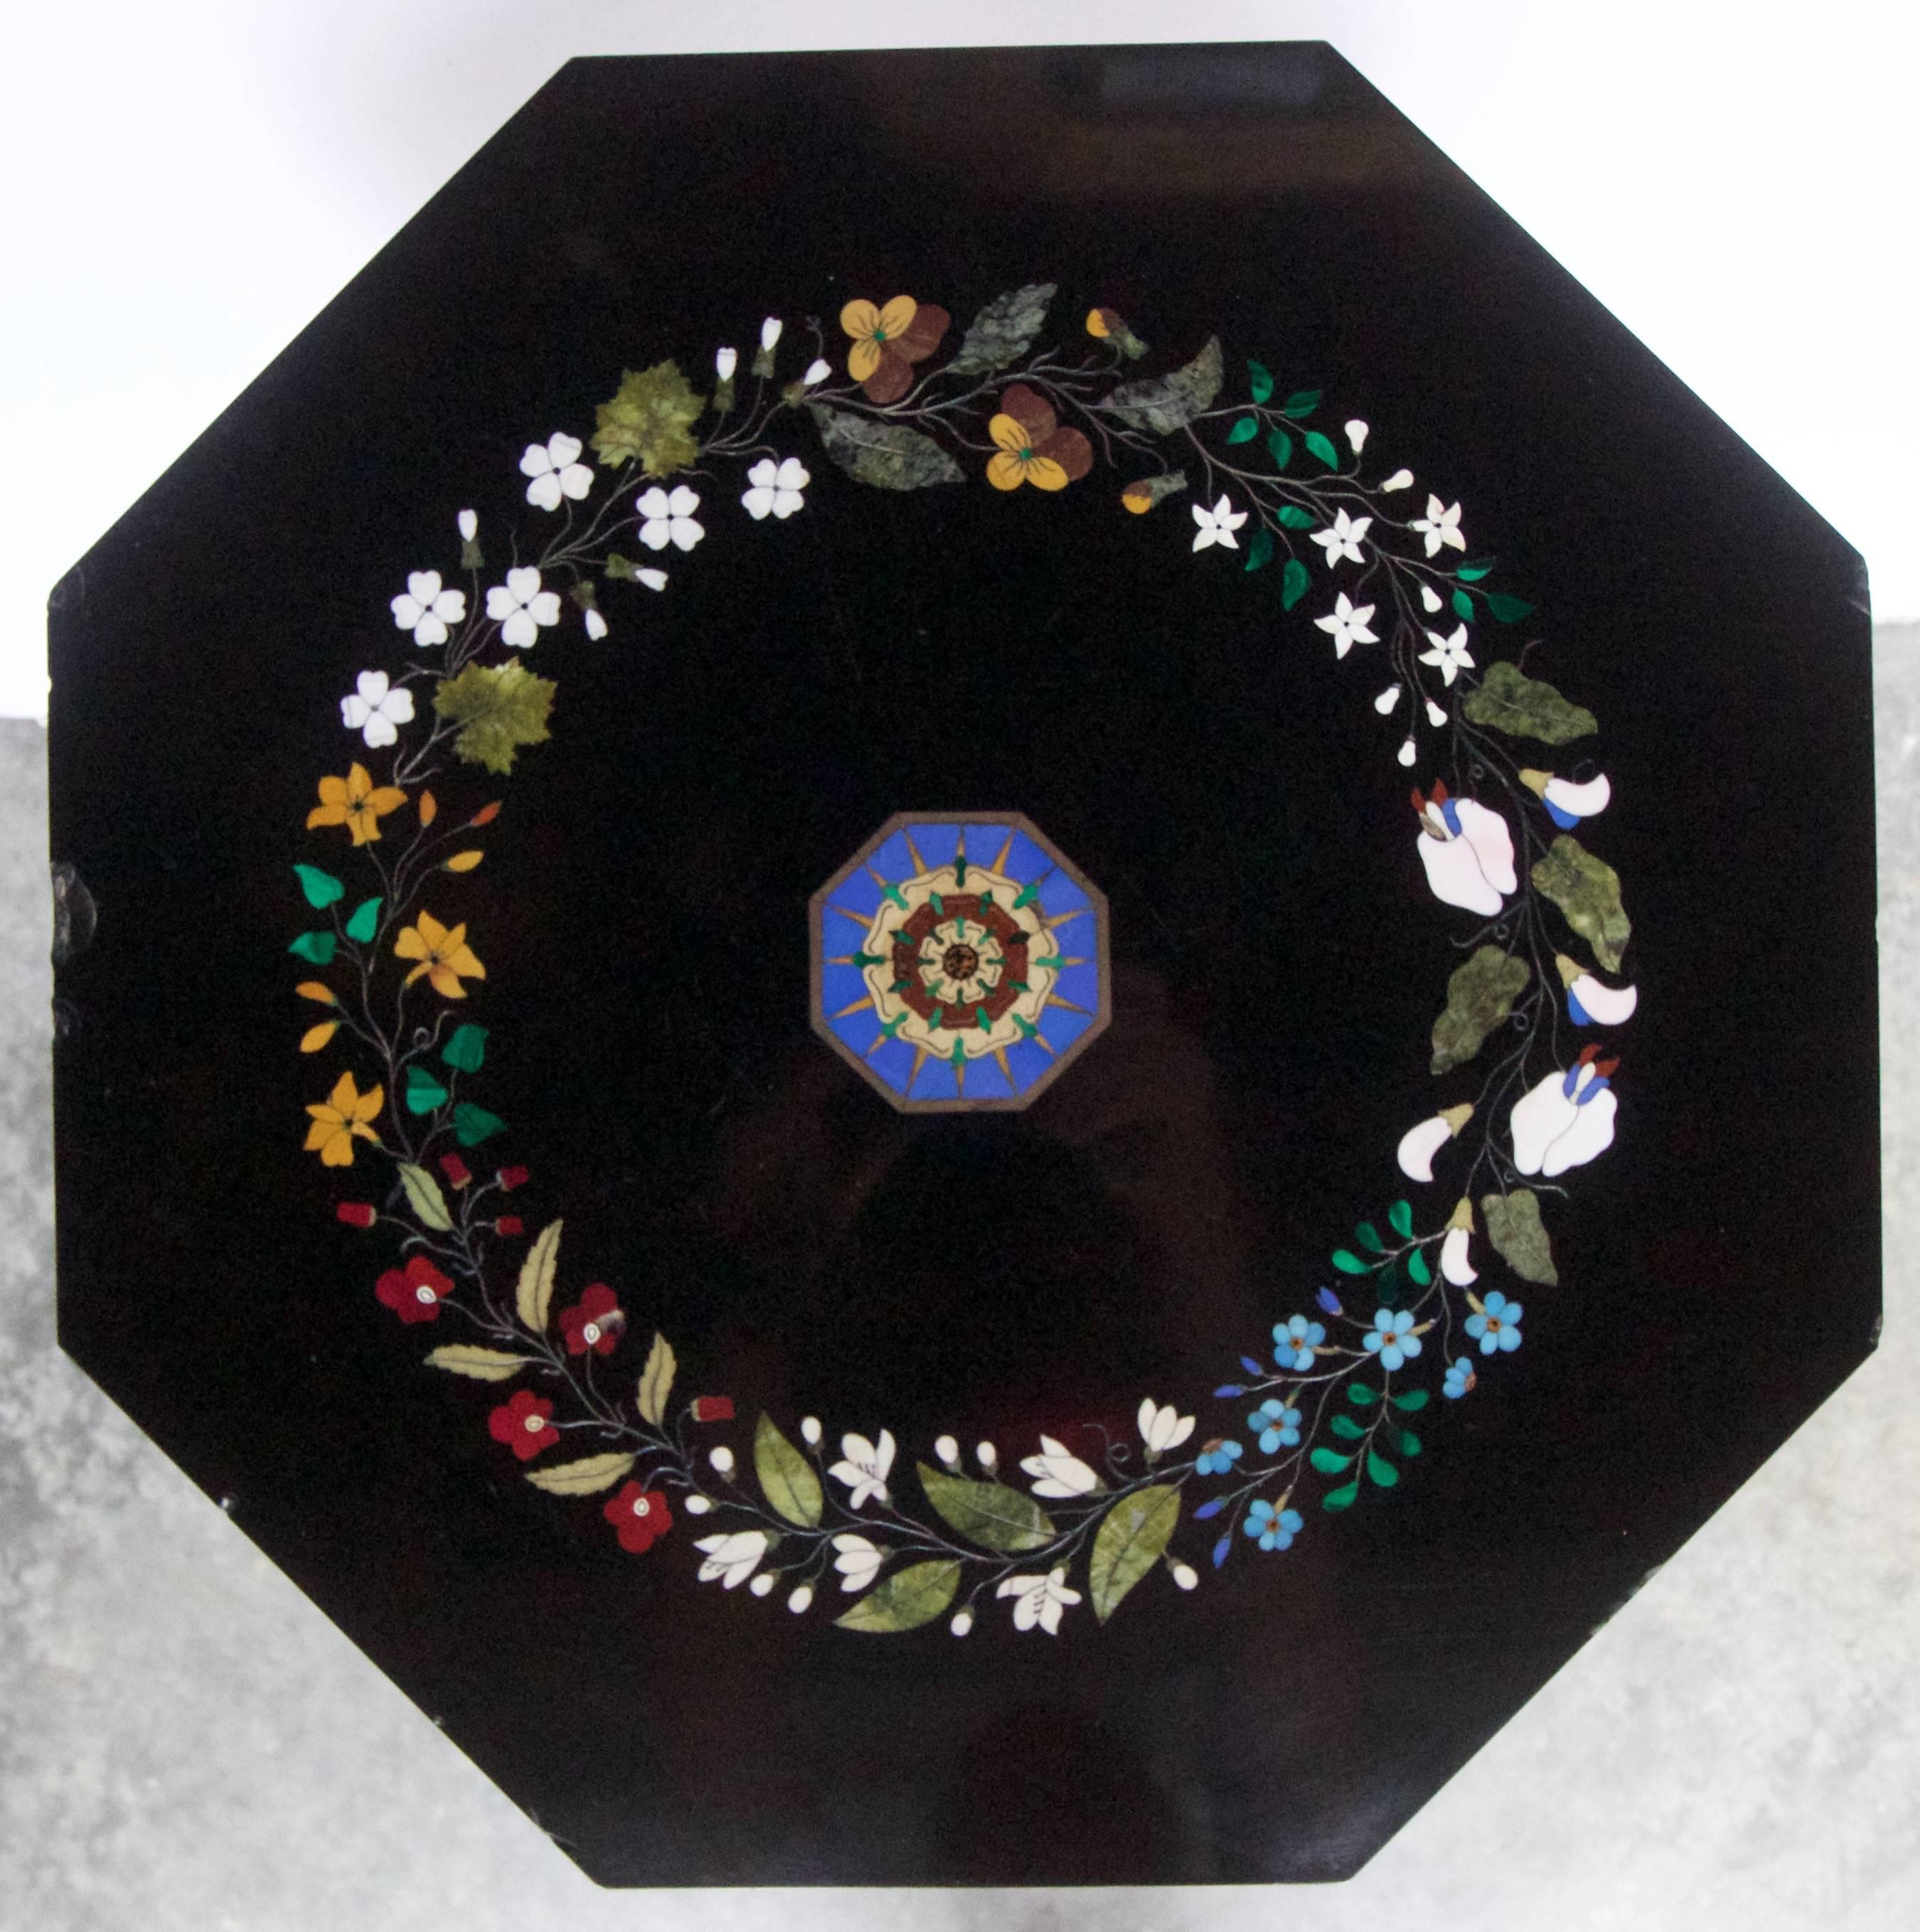 A very fine mid-19th century Florentine pietra dura inlaid decor on an octagonal black Belgian table marble top. The pietra dura inlay depicting a colorful circular guirland of flowers and foliage made of semi precious hardstones such as malachite,